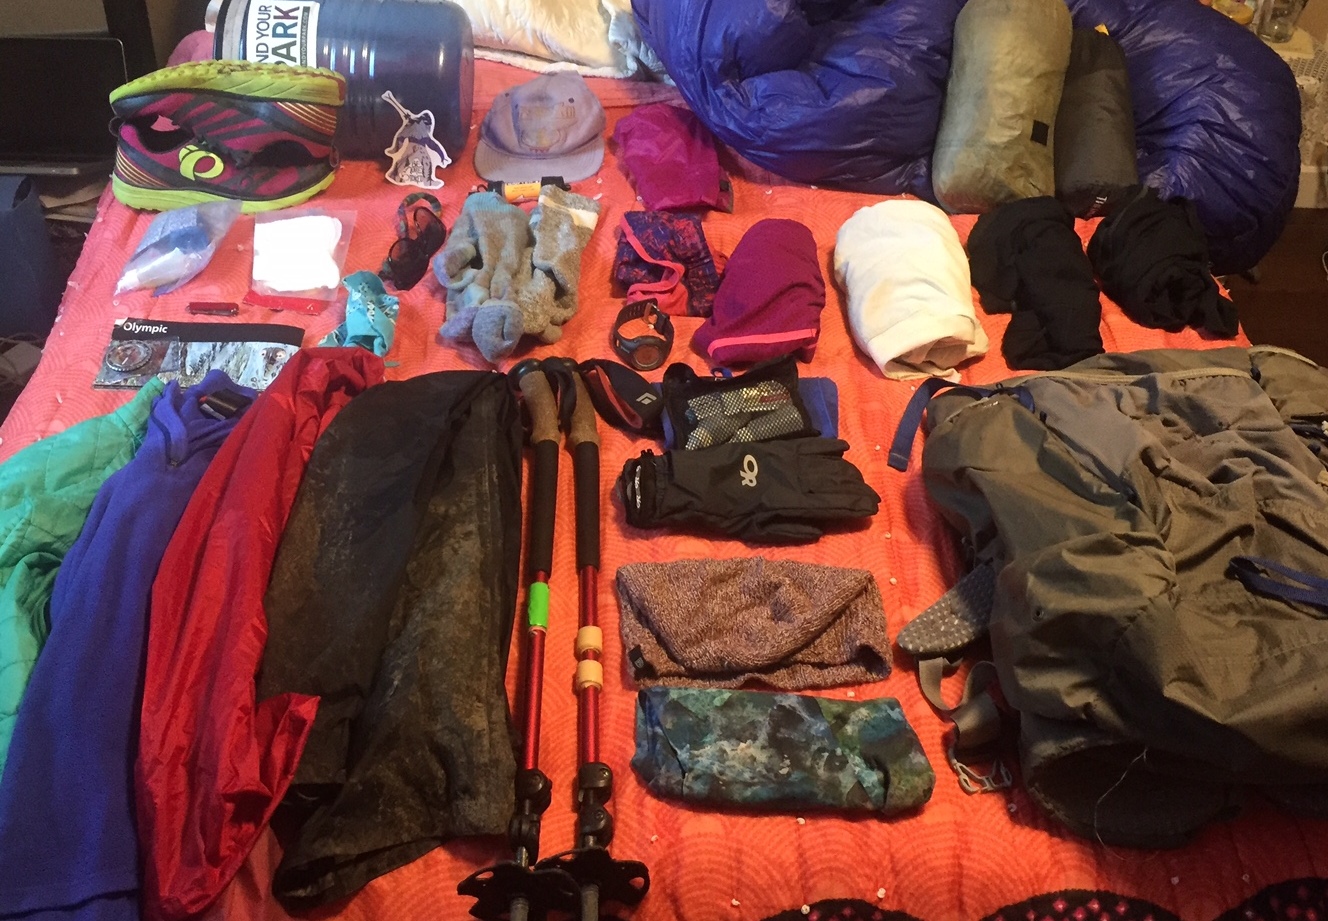 https://www.mountaineers.org/blog/how-to-prepare-for-an-overnight-trip/@@images/image